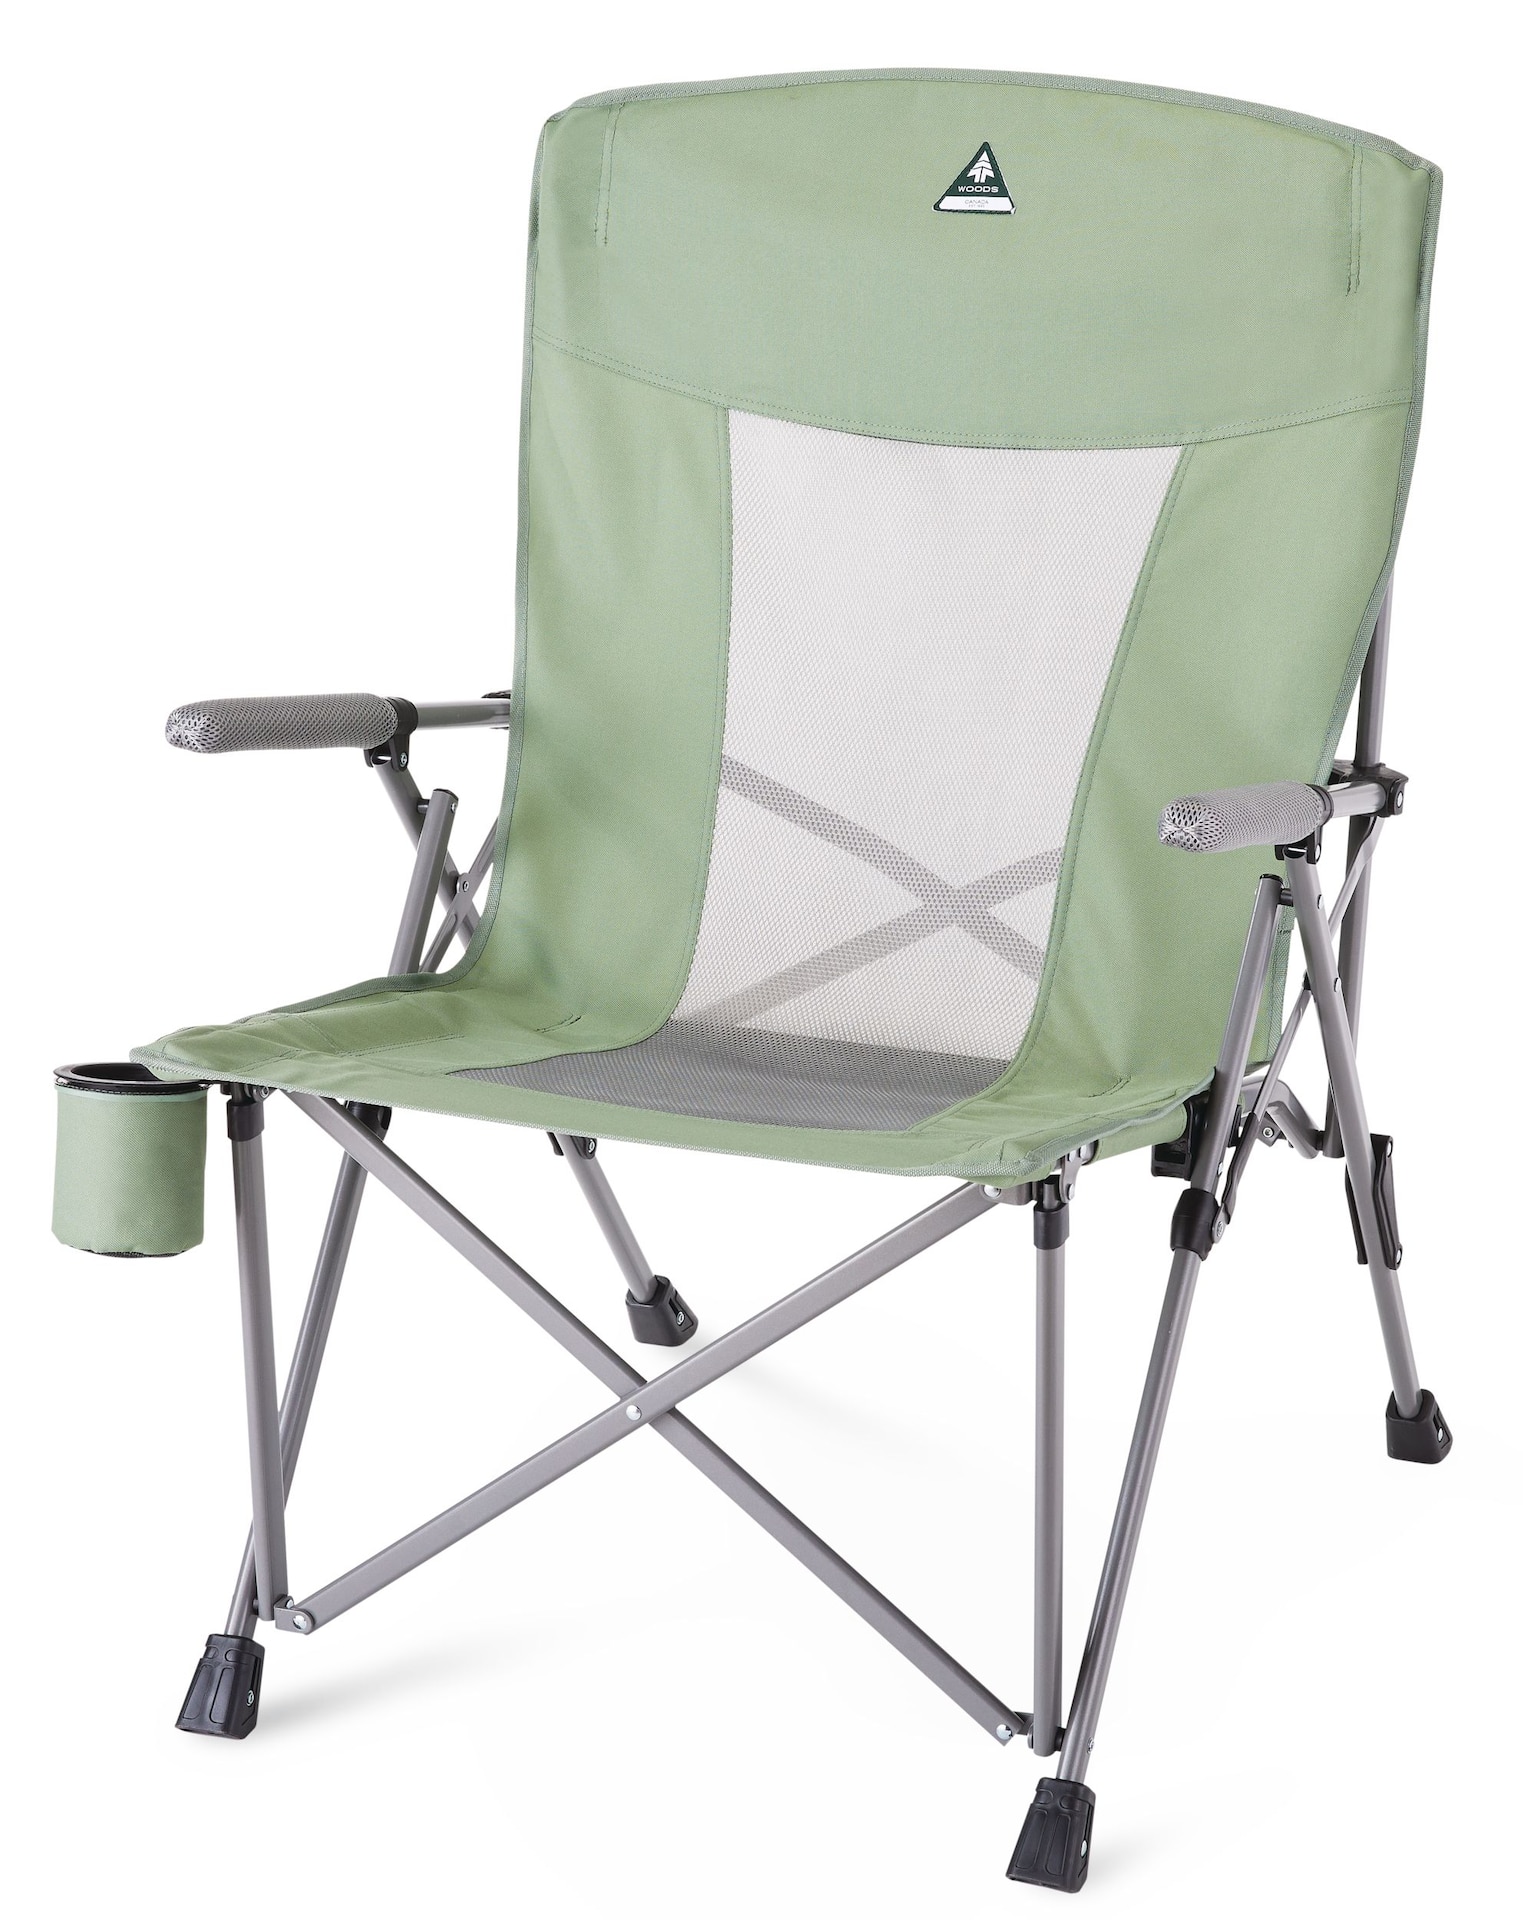 https://media-www.canadiantire.ca/product/playing/camping/camping-furniture/0763716/woods-dawson-high-capacity-arm-chair-4af54a89-2cfc-4889-826e-a998cfd0ceec-jpgrendition.jpg